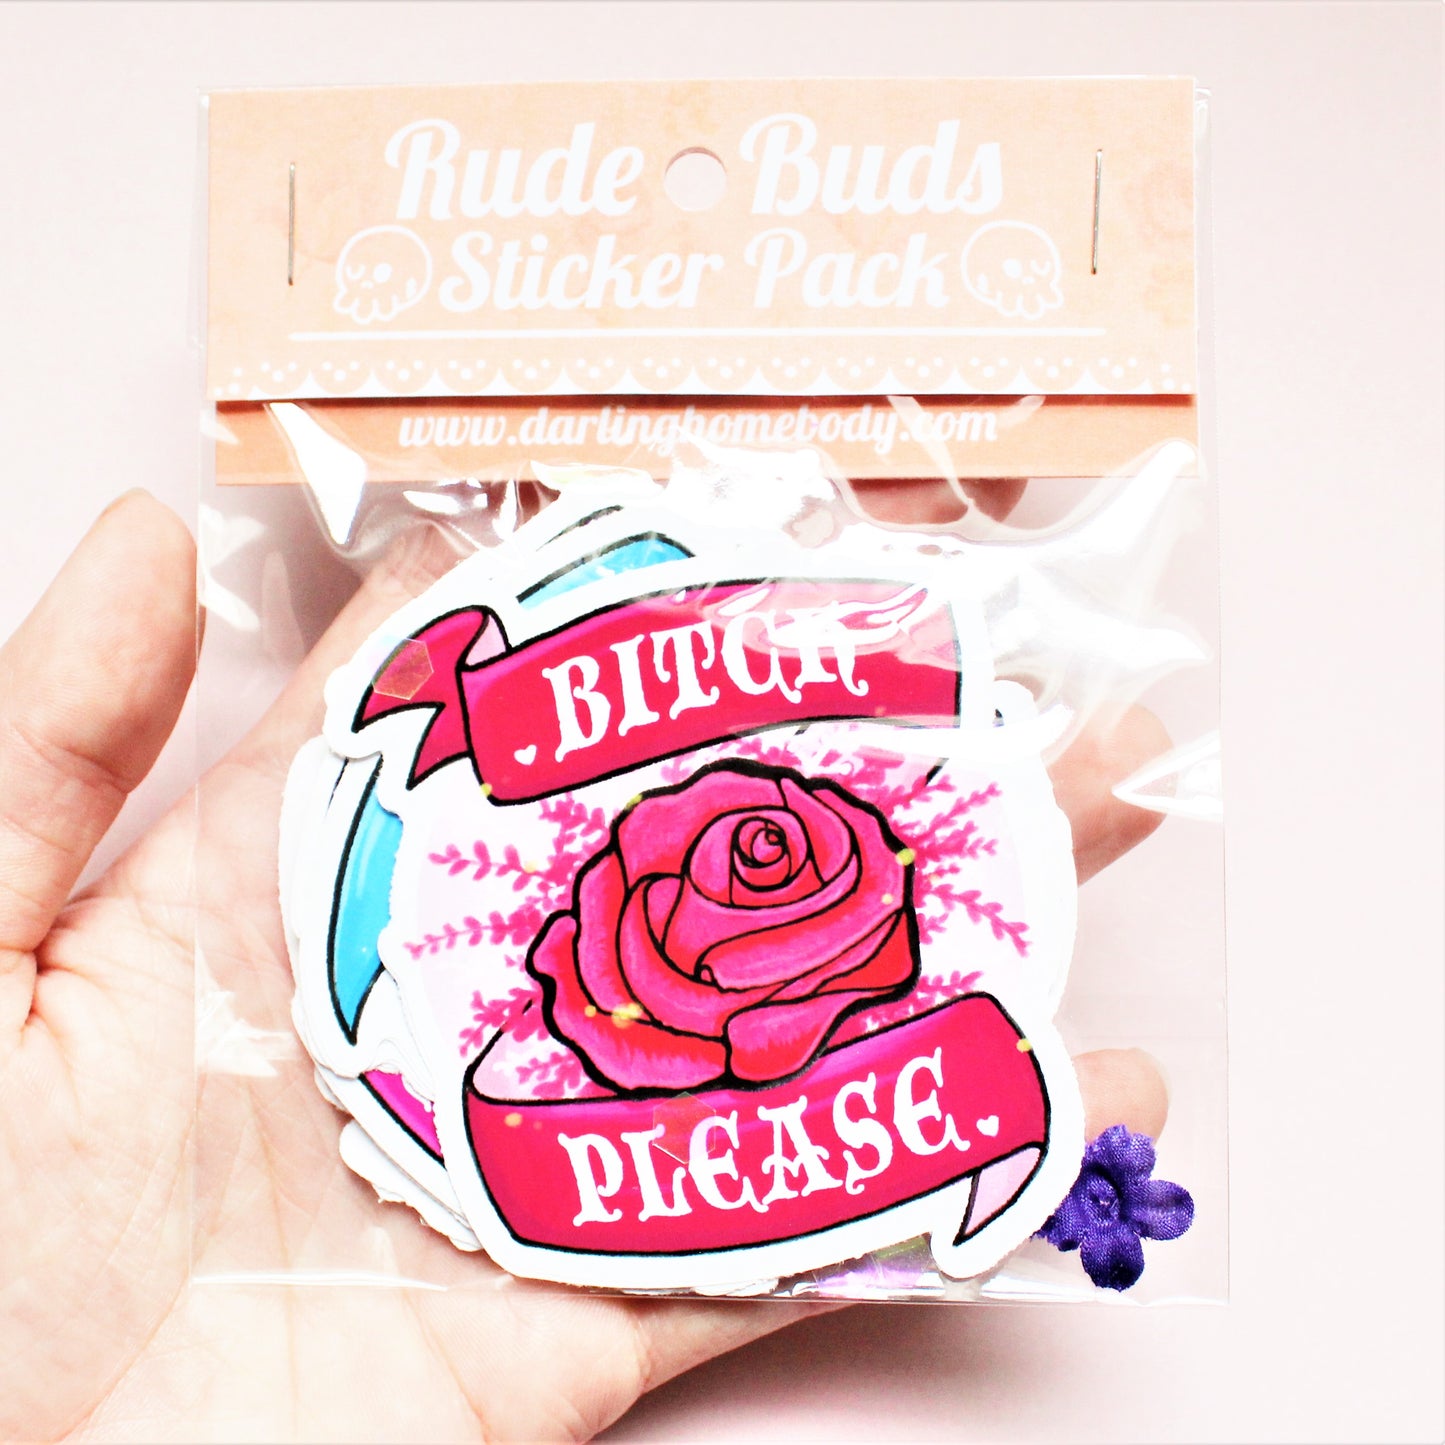 9 Pack of Stickers. Pack of Mean Flower Sayings. Funny Adult Decals. Snob Humor Gift. Rude Girl Stickers. Snarky Joke Sticker.